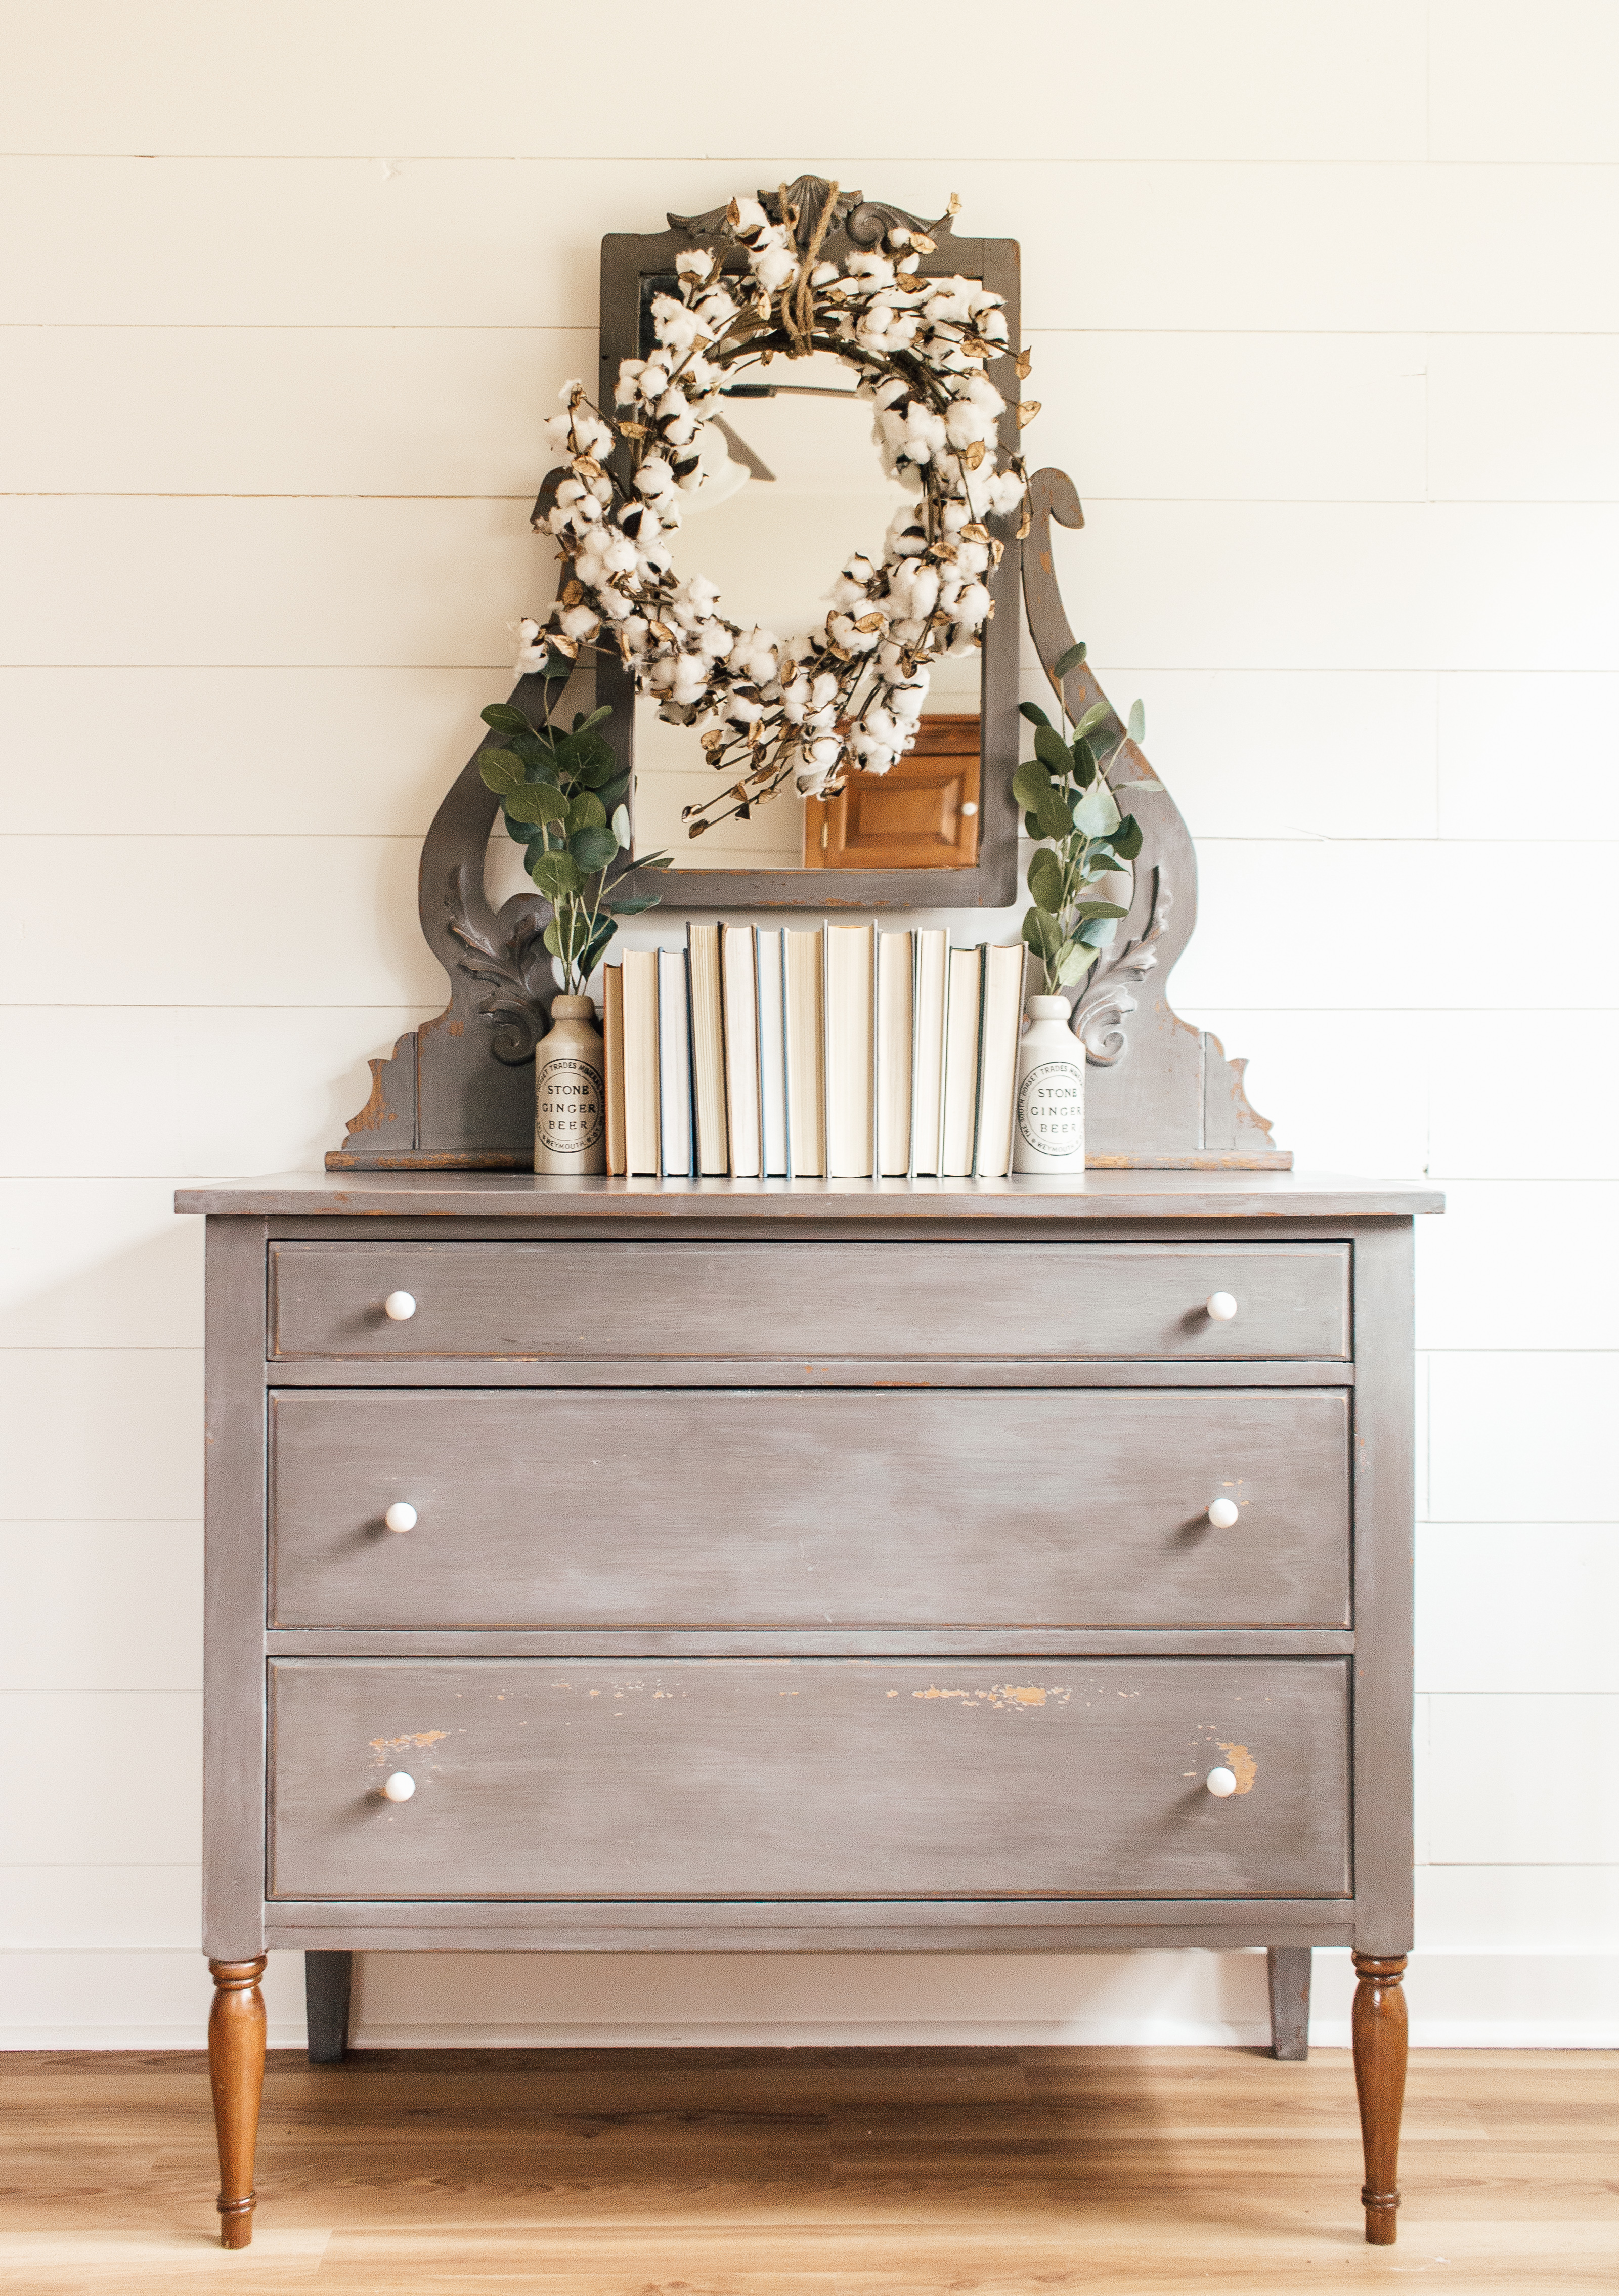 Trying a new milk paint: Shackteau Interiors